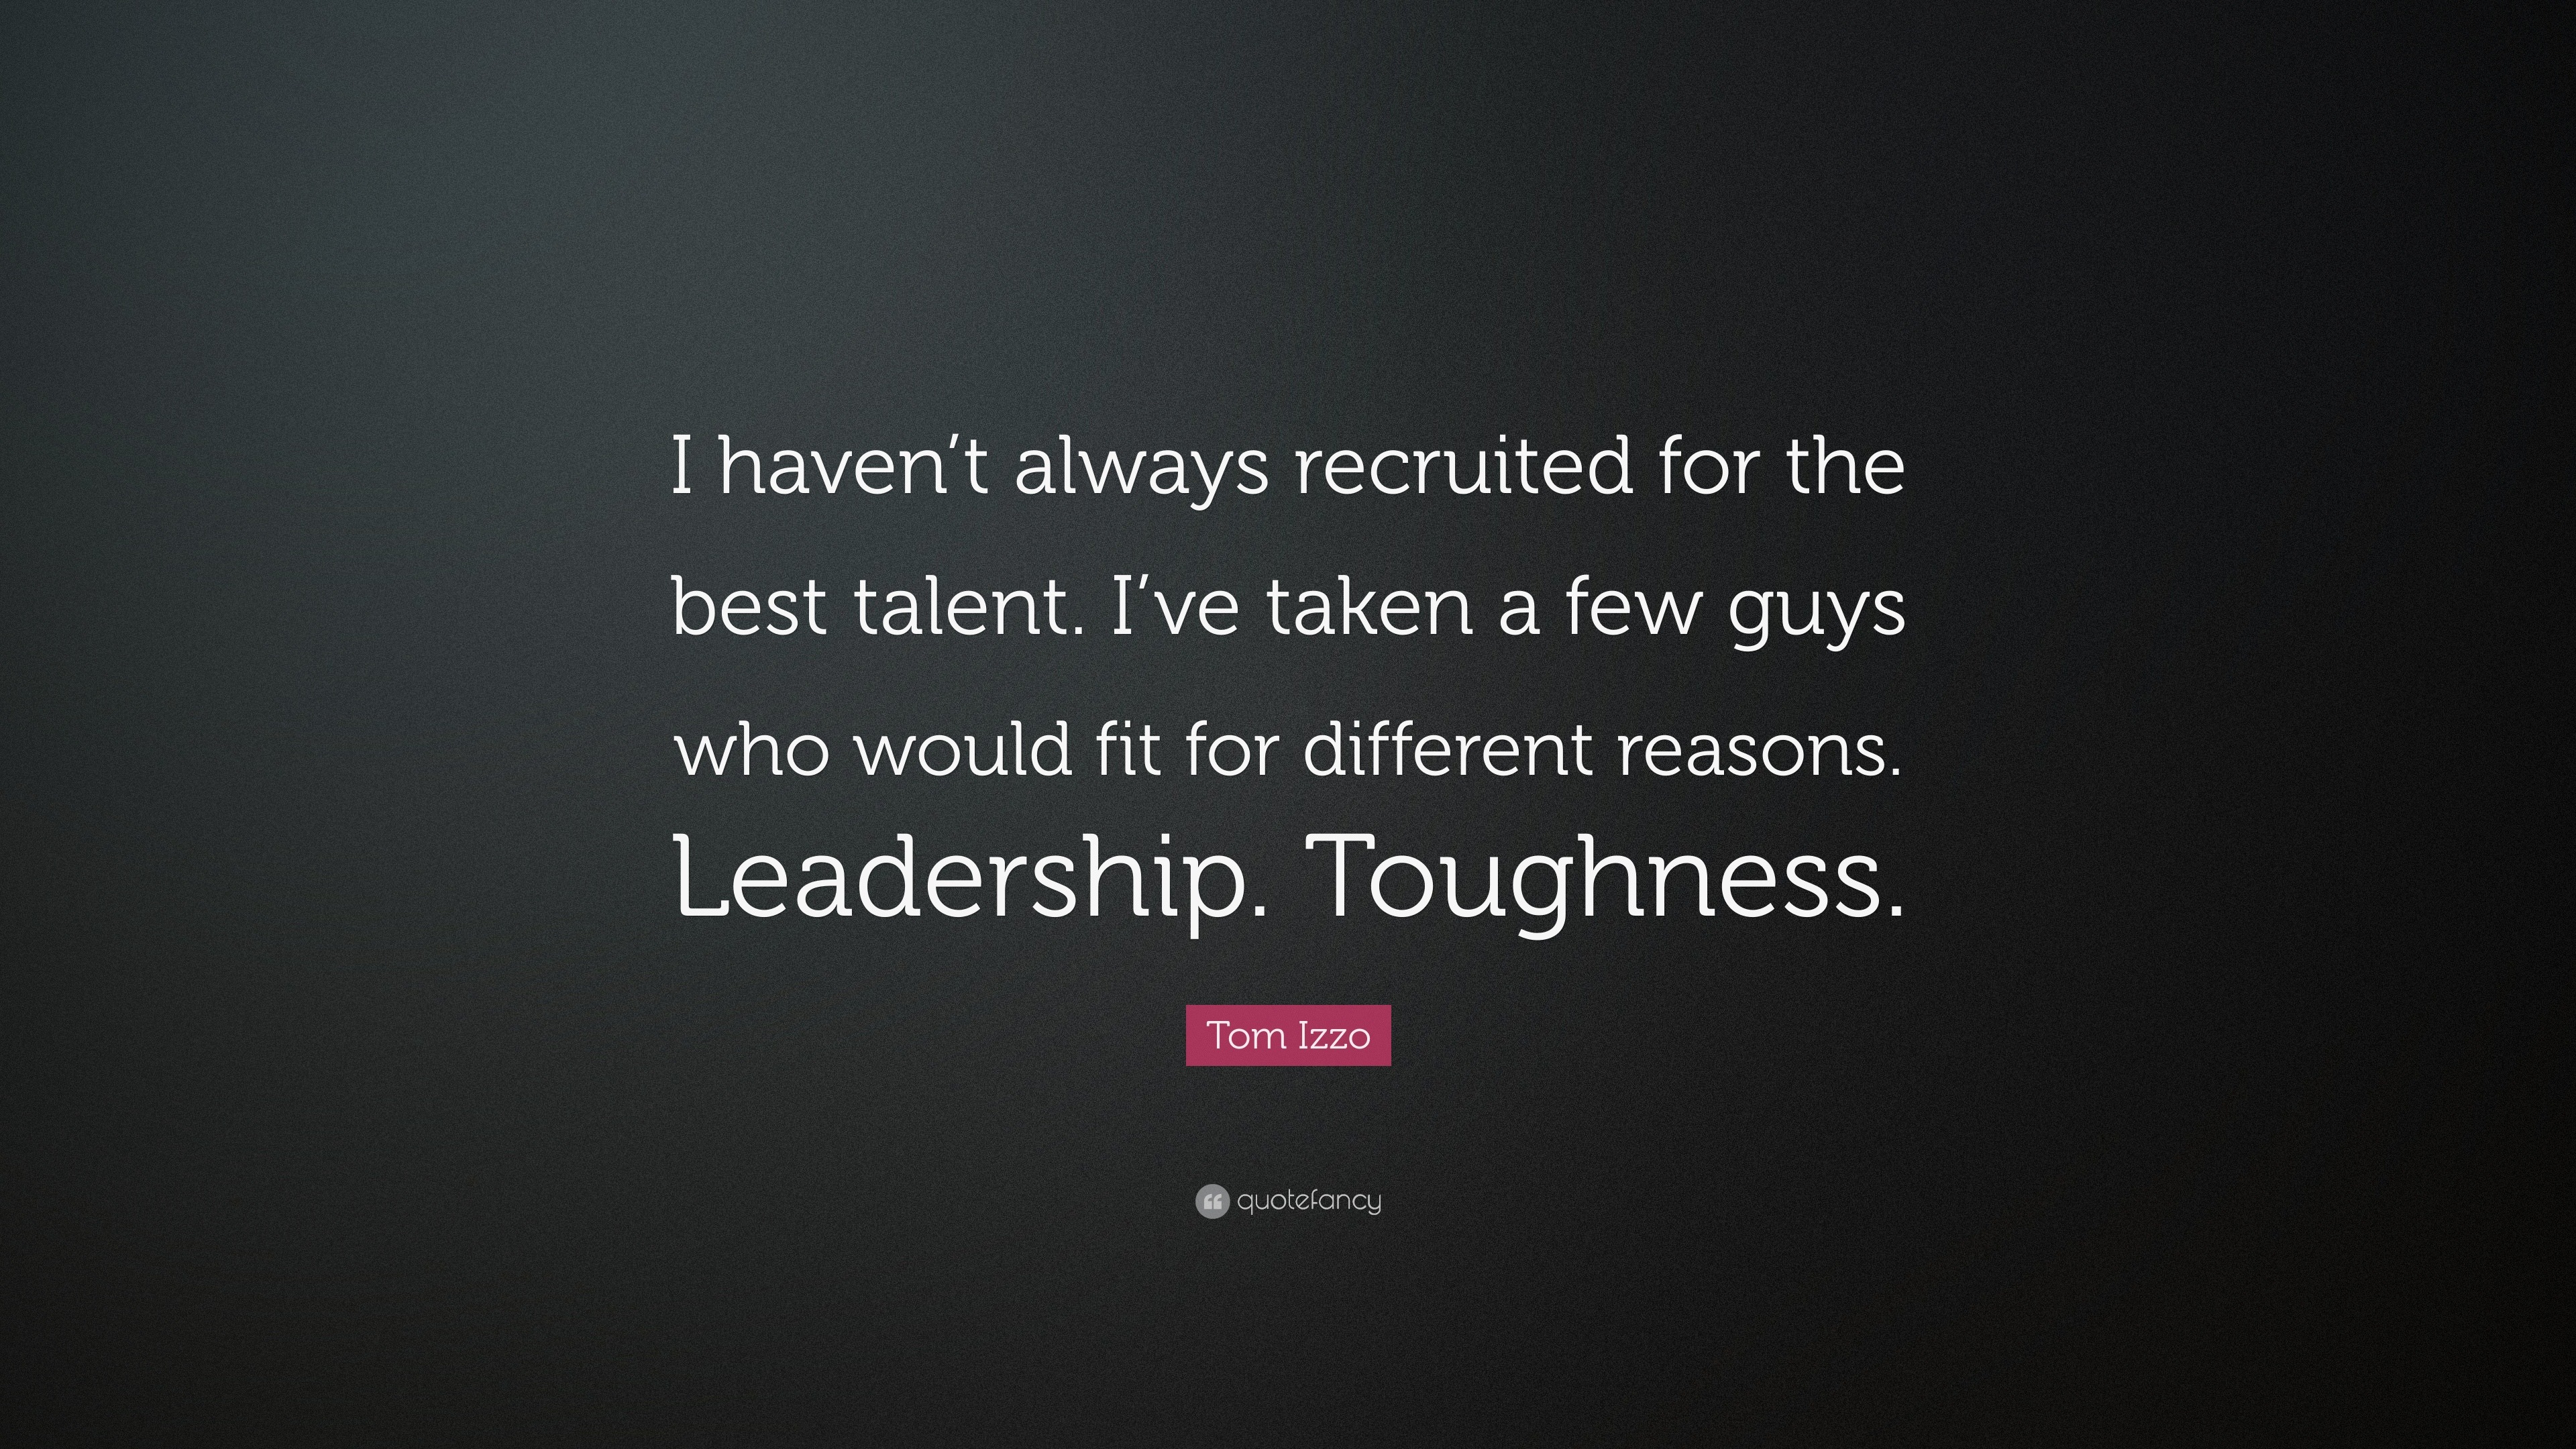 Tom Izzo Quote: “I haven’t always recruited for the best talent. I’ve ...